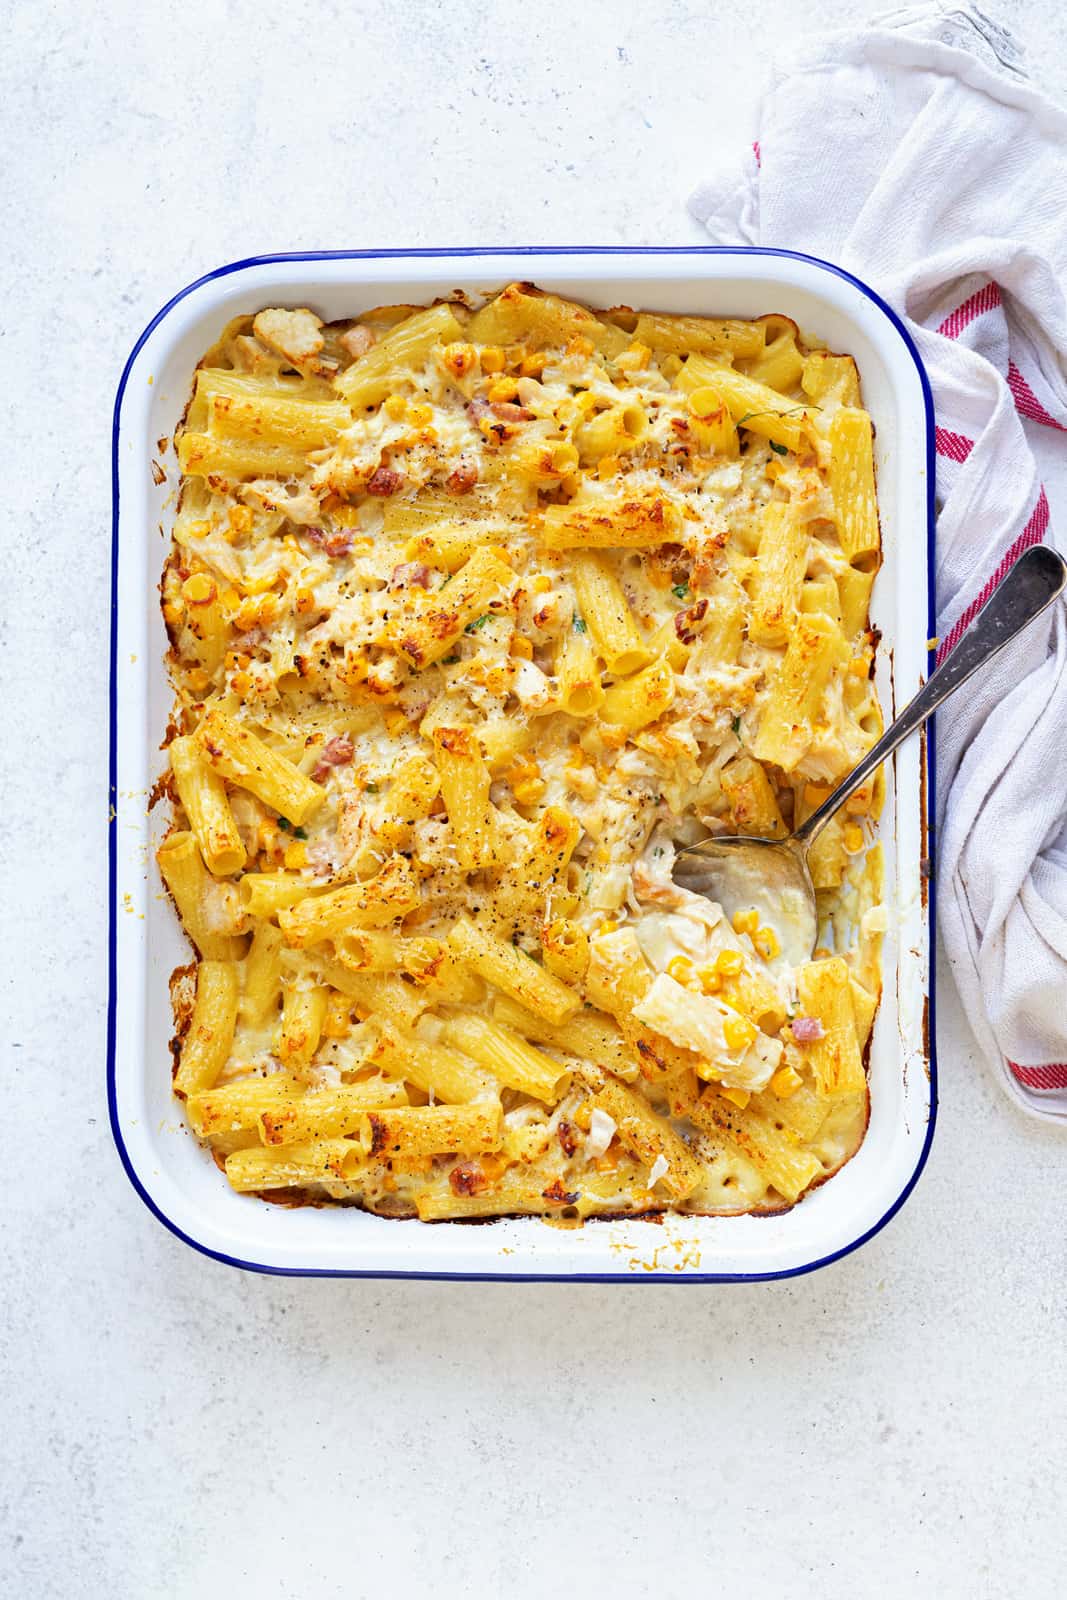 Chicken and Bacon pasta bake in a large enamel baking dish